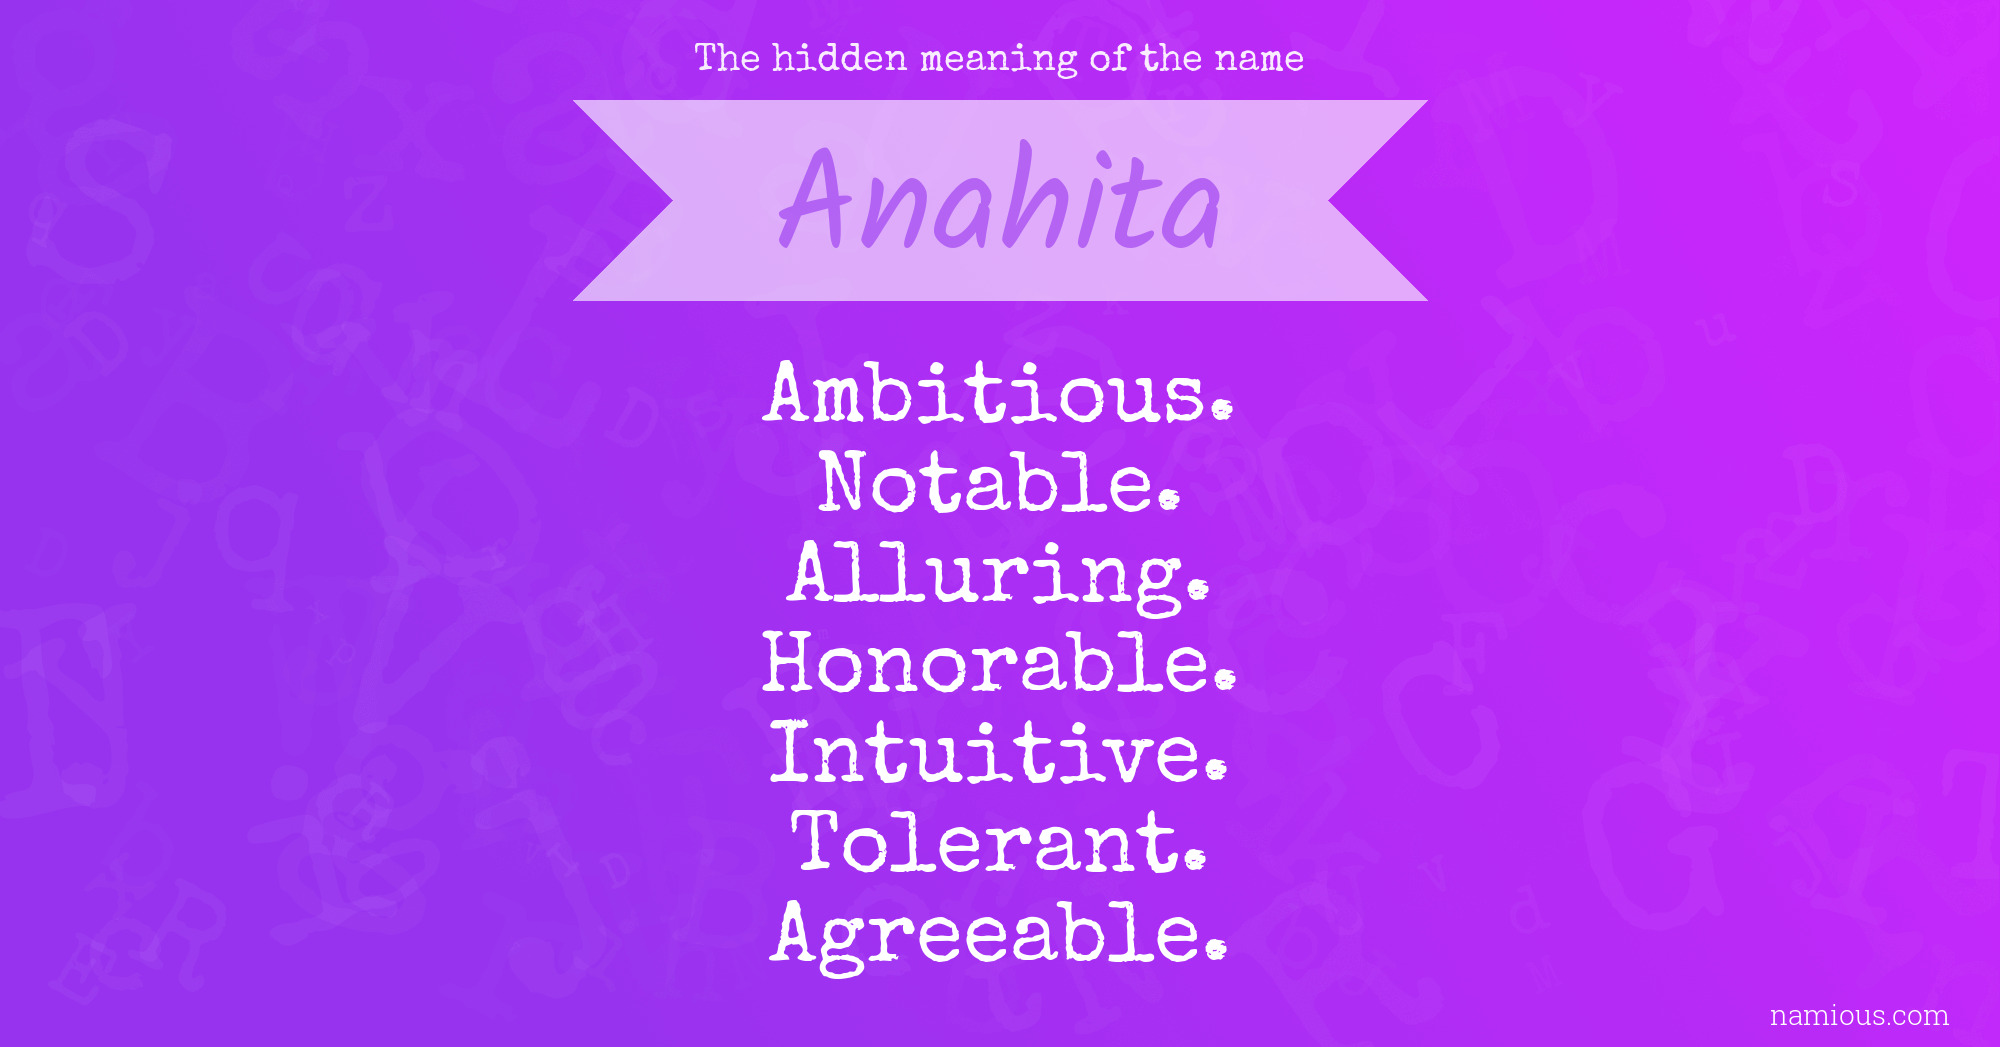 The hidden meaning of the name Anahita